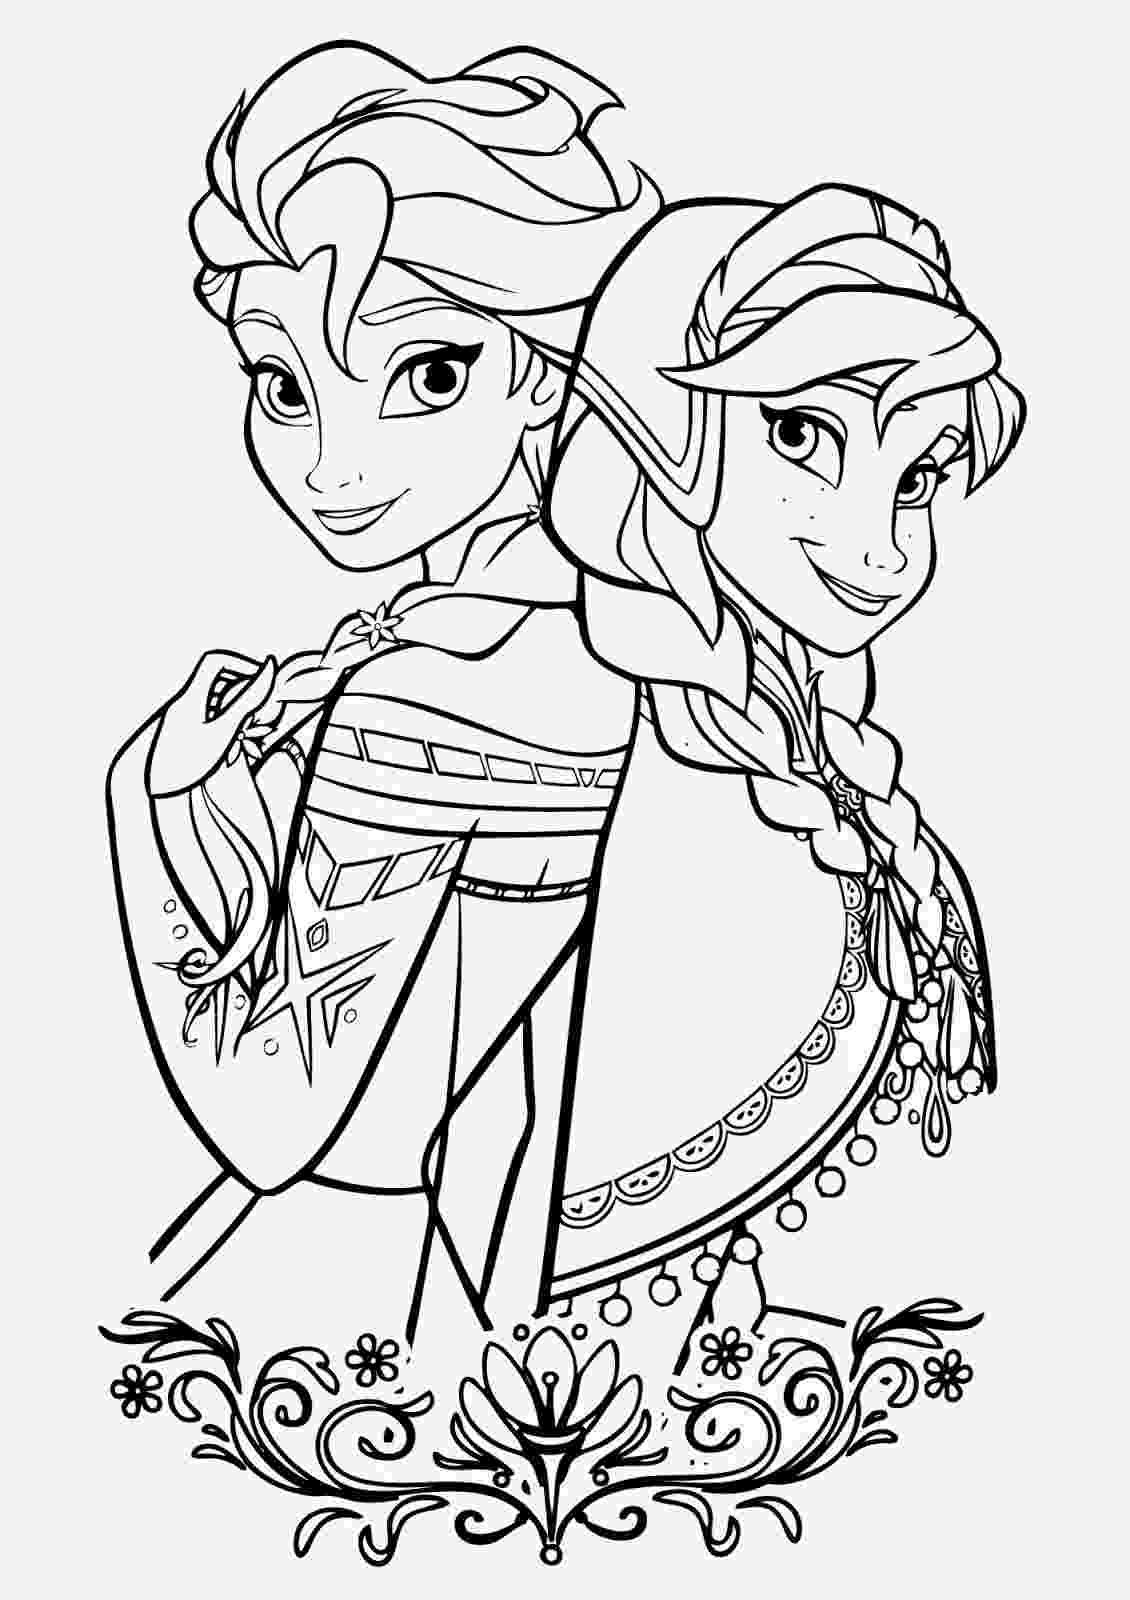 anna and elsa coloring pages free printable coloring pages elsa and anna 2015 elsa pages anna coloring and 